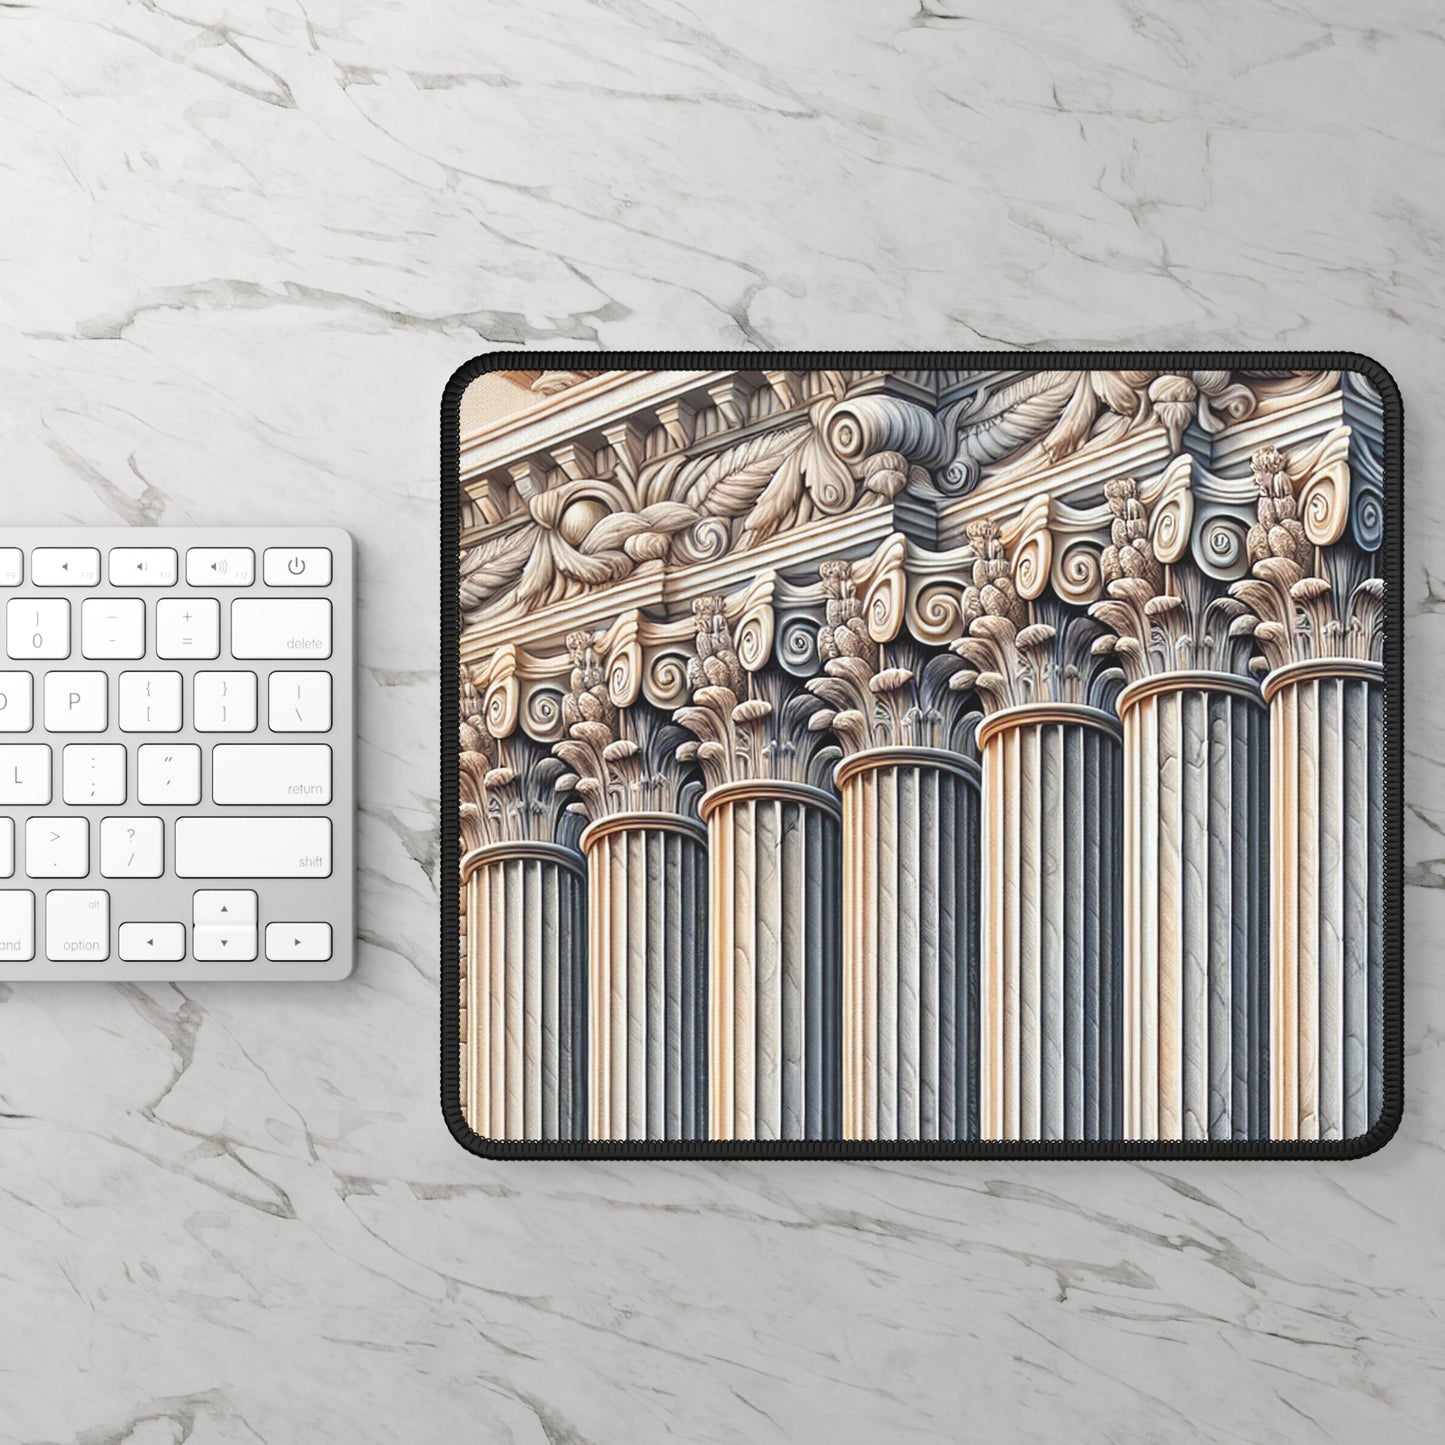 "3D Wall Columns: An Architectural Artpiece" - The Alien Gaming Mouse Pad Trompe-l'oeil Style